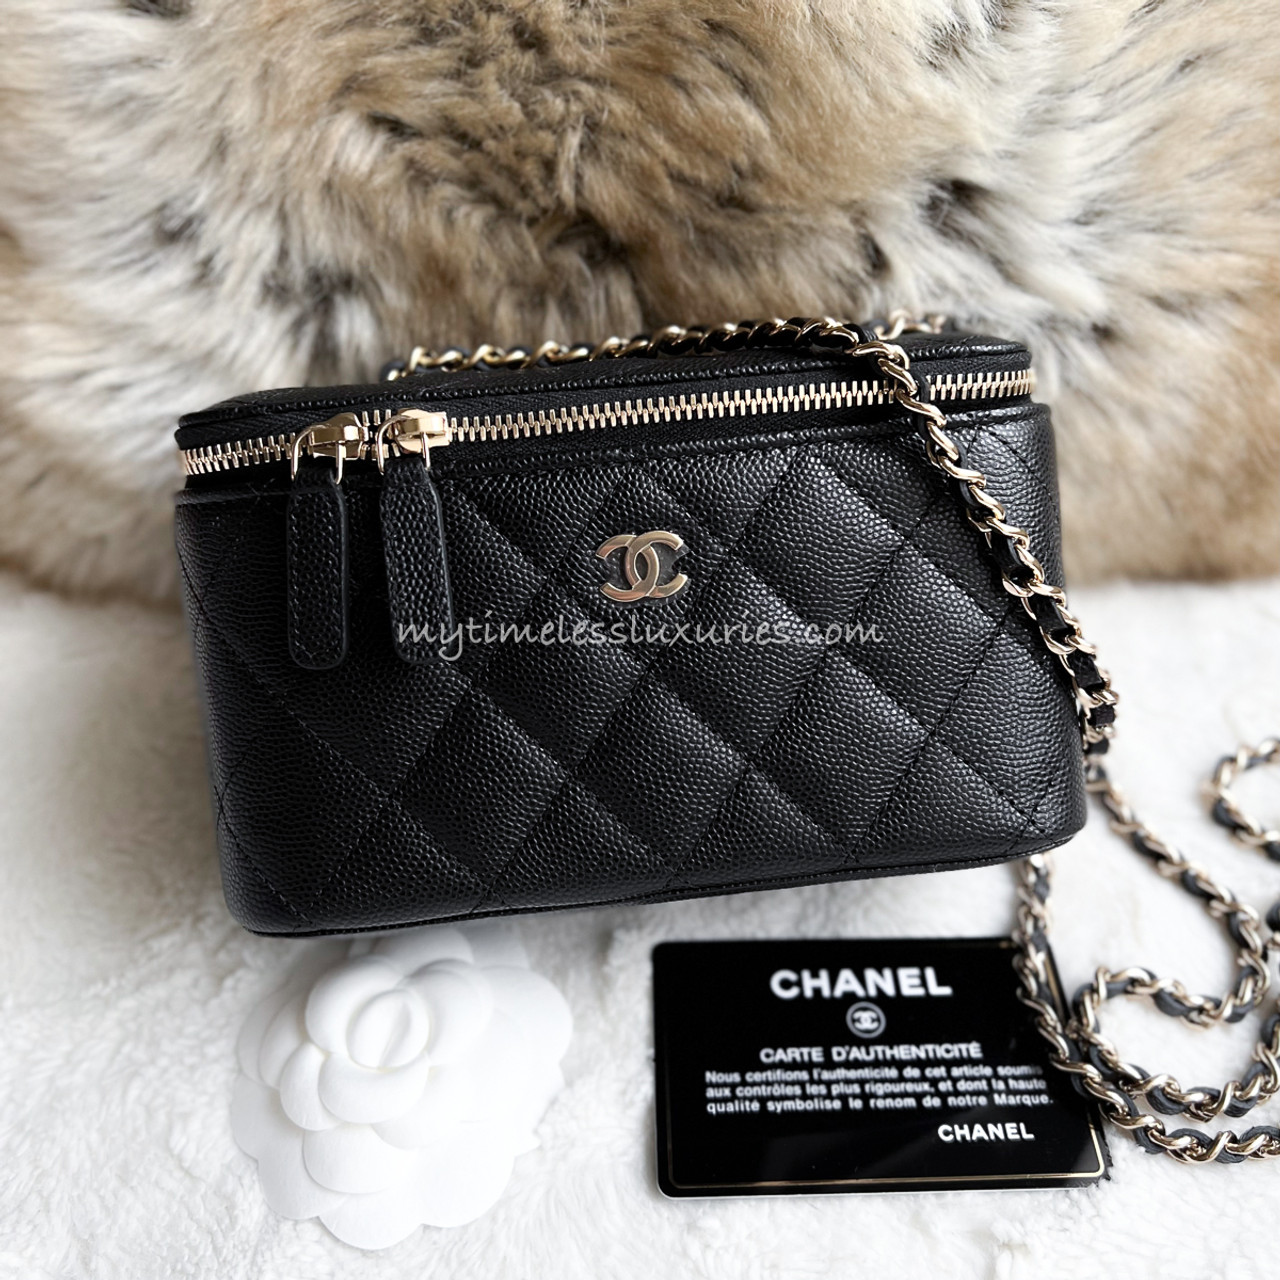 Complete Review of the Chanel Vanity Bag  Handbags and Accessories   Sothebys